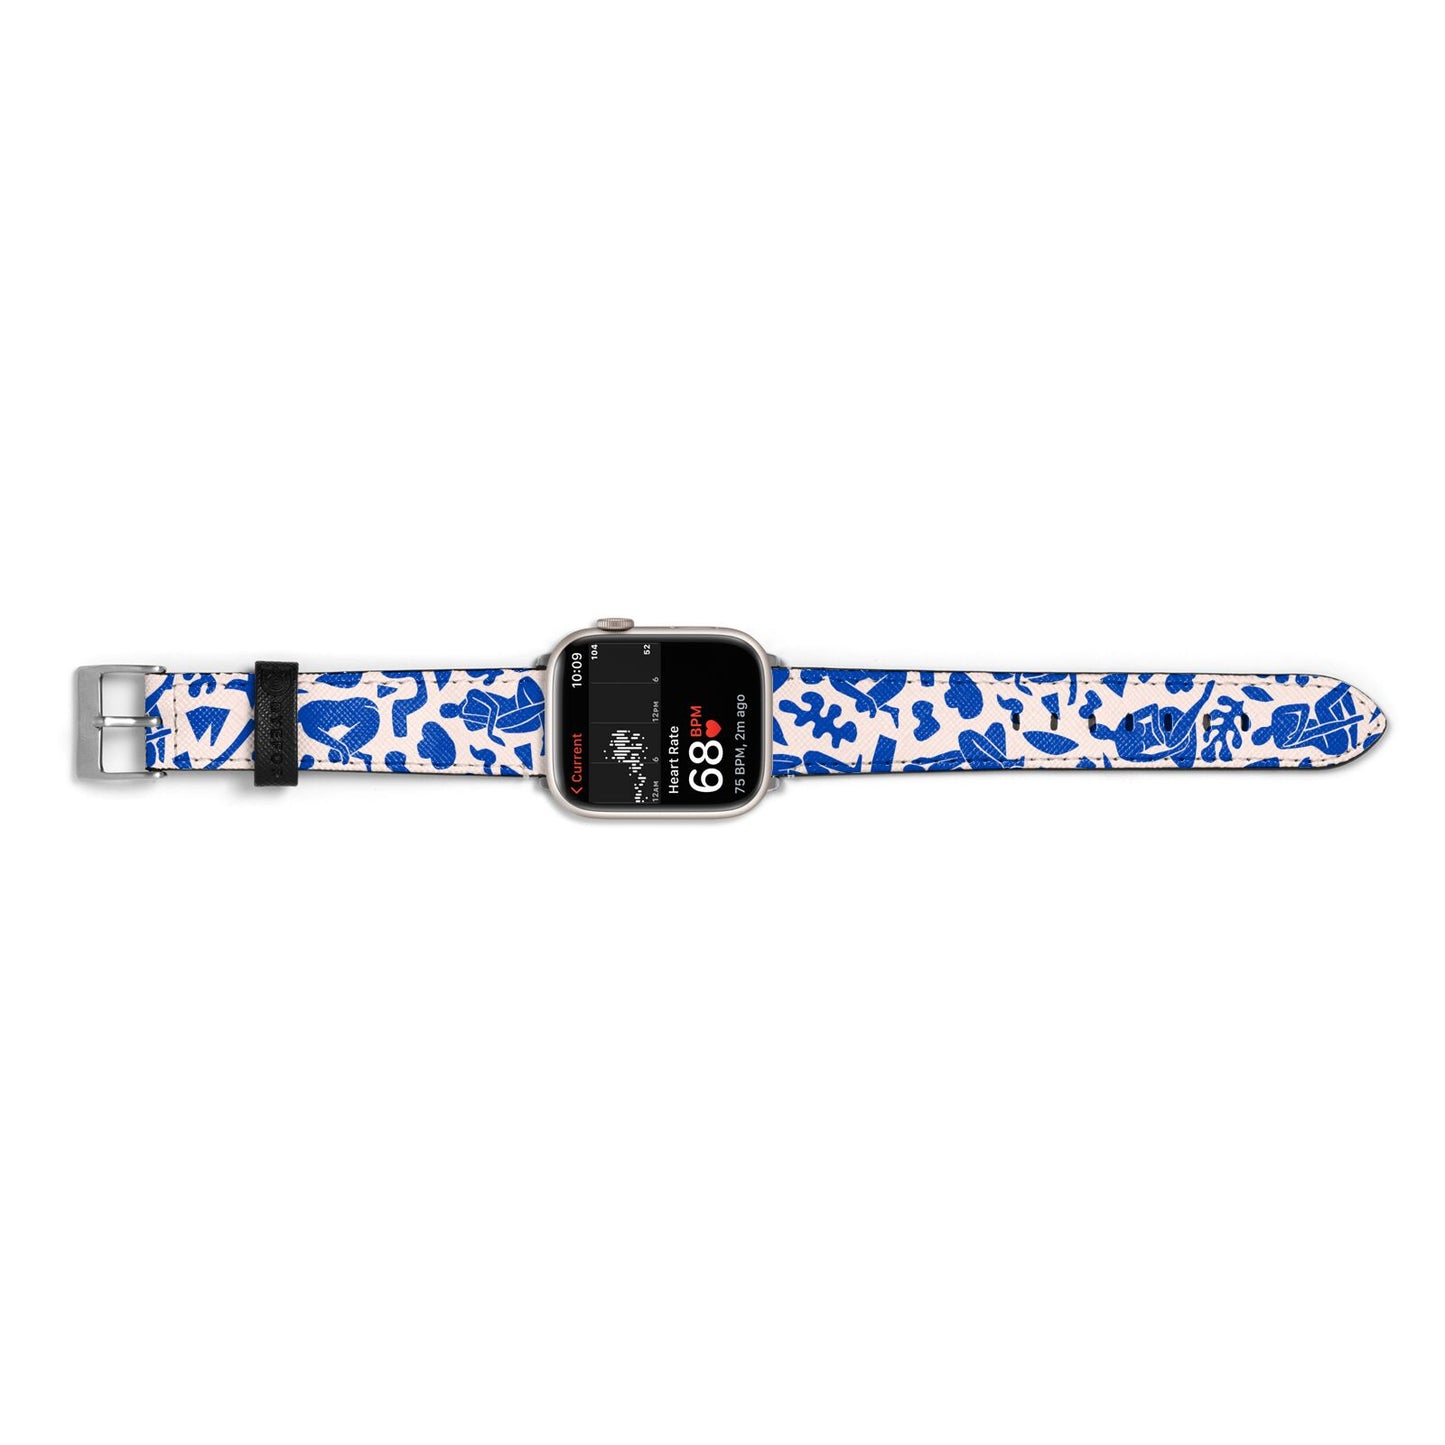 Abstract Art Apple Watch Strap Size 38mm Landscape Image Silver Hardware